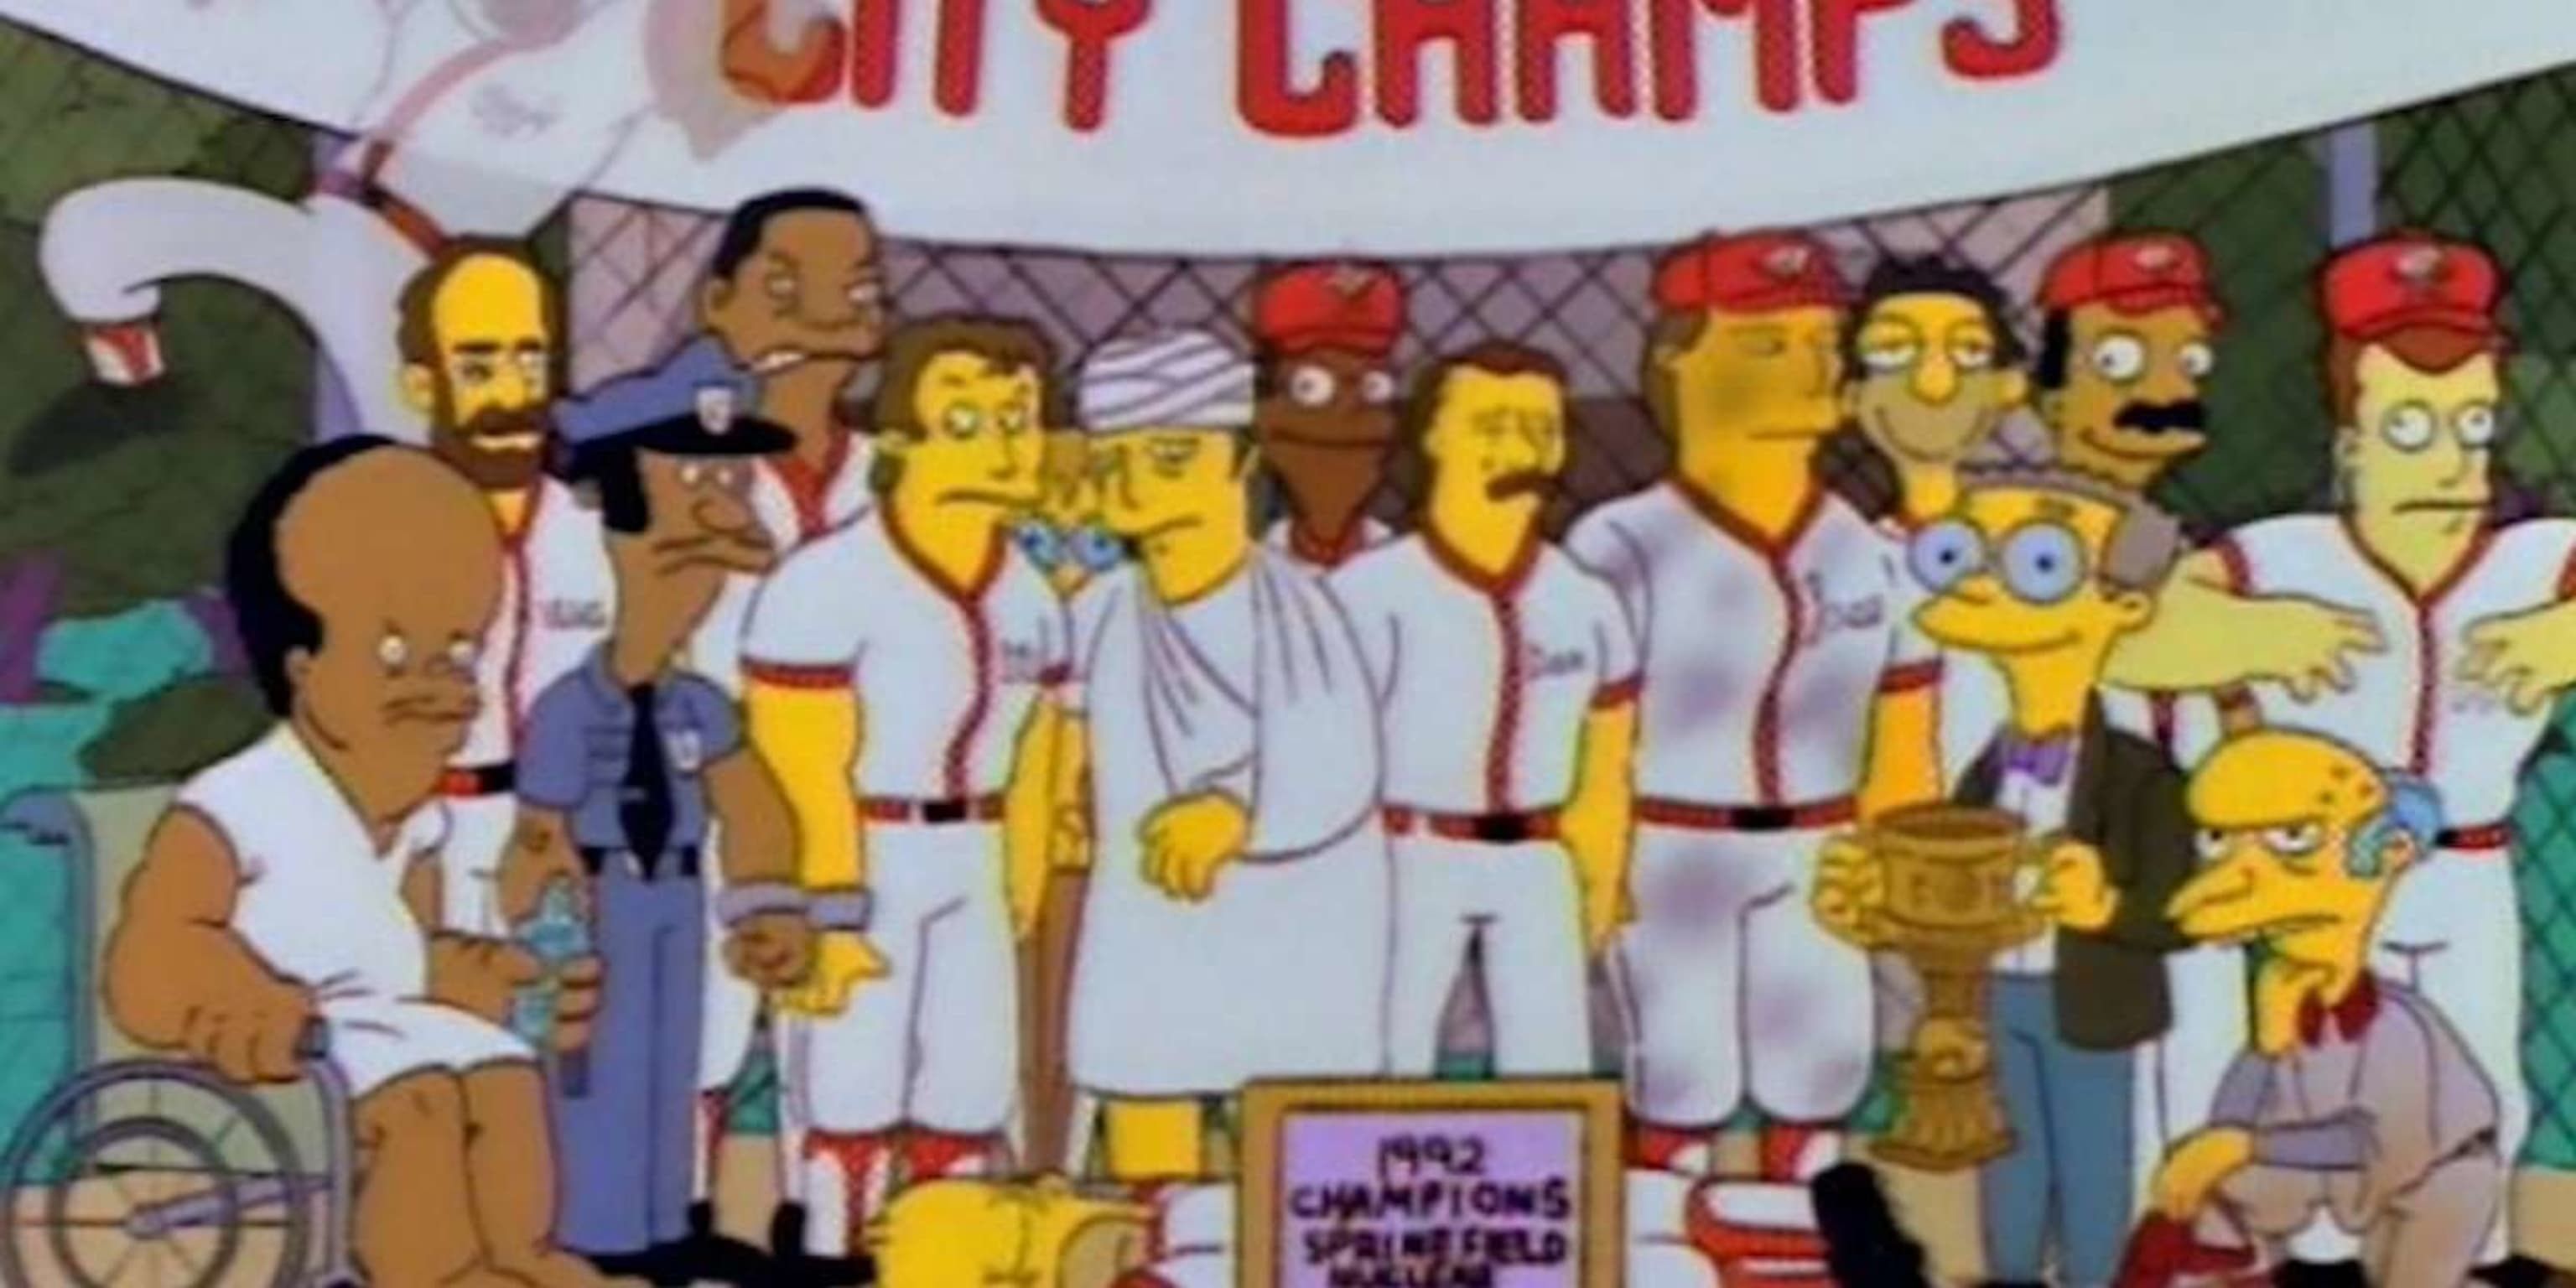 A baseball team stands together in The Simpsons